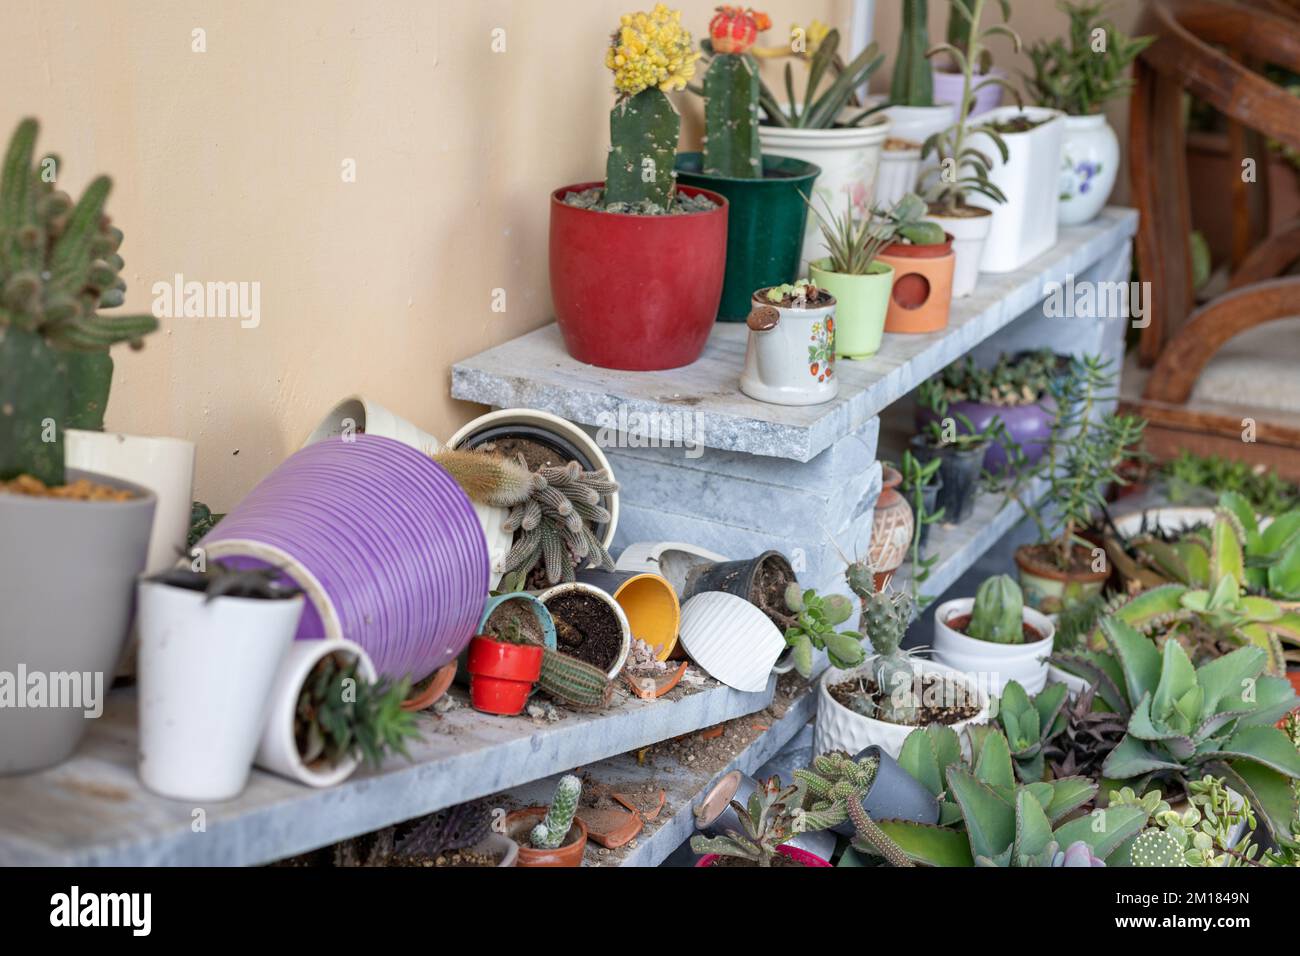 Gardening home chores of cleaning the dirt from broken flowerpots Stock Photo